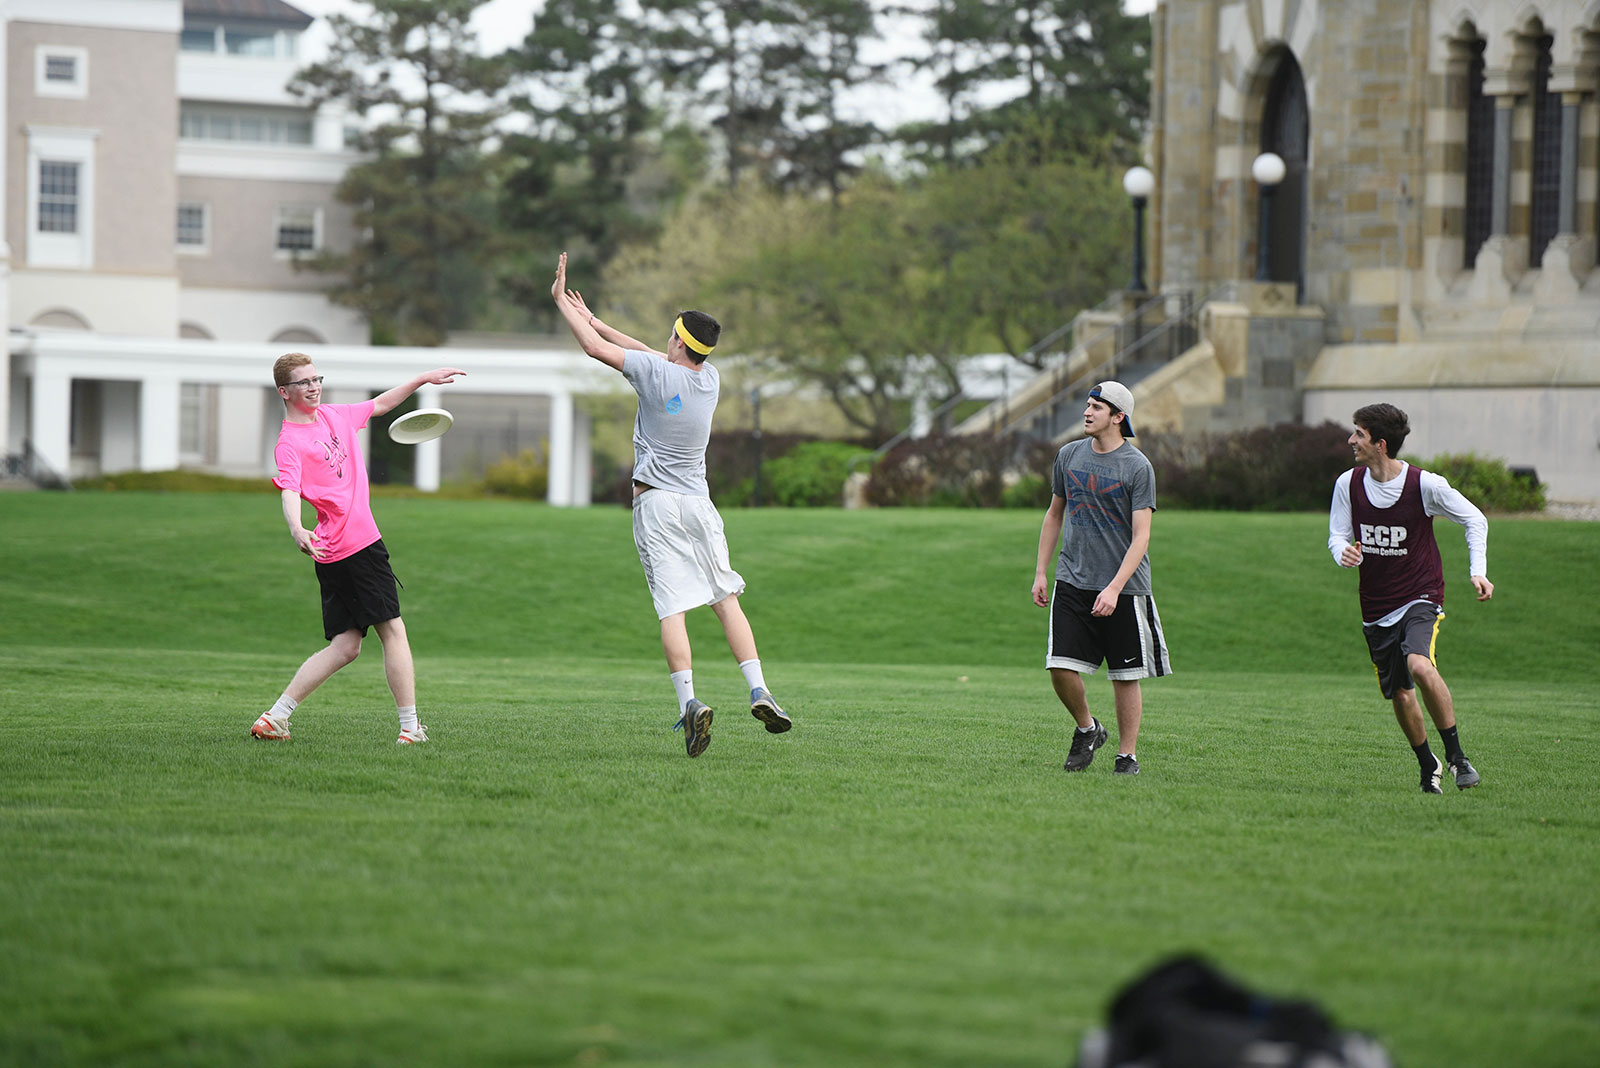 
A group of students playing frisbee golf on the lawn, with the library and Nott Memorial visible in the background.